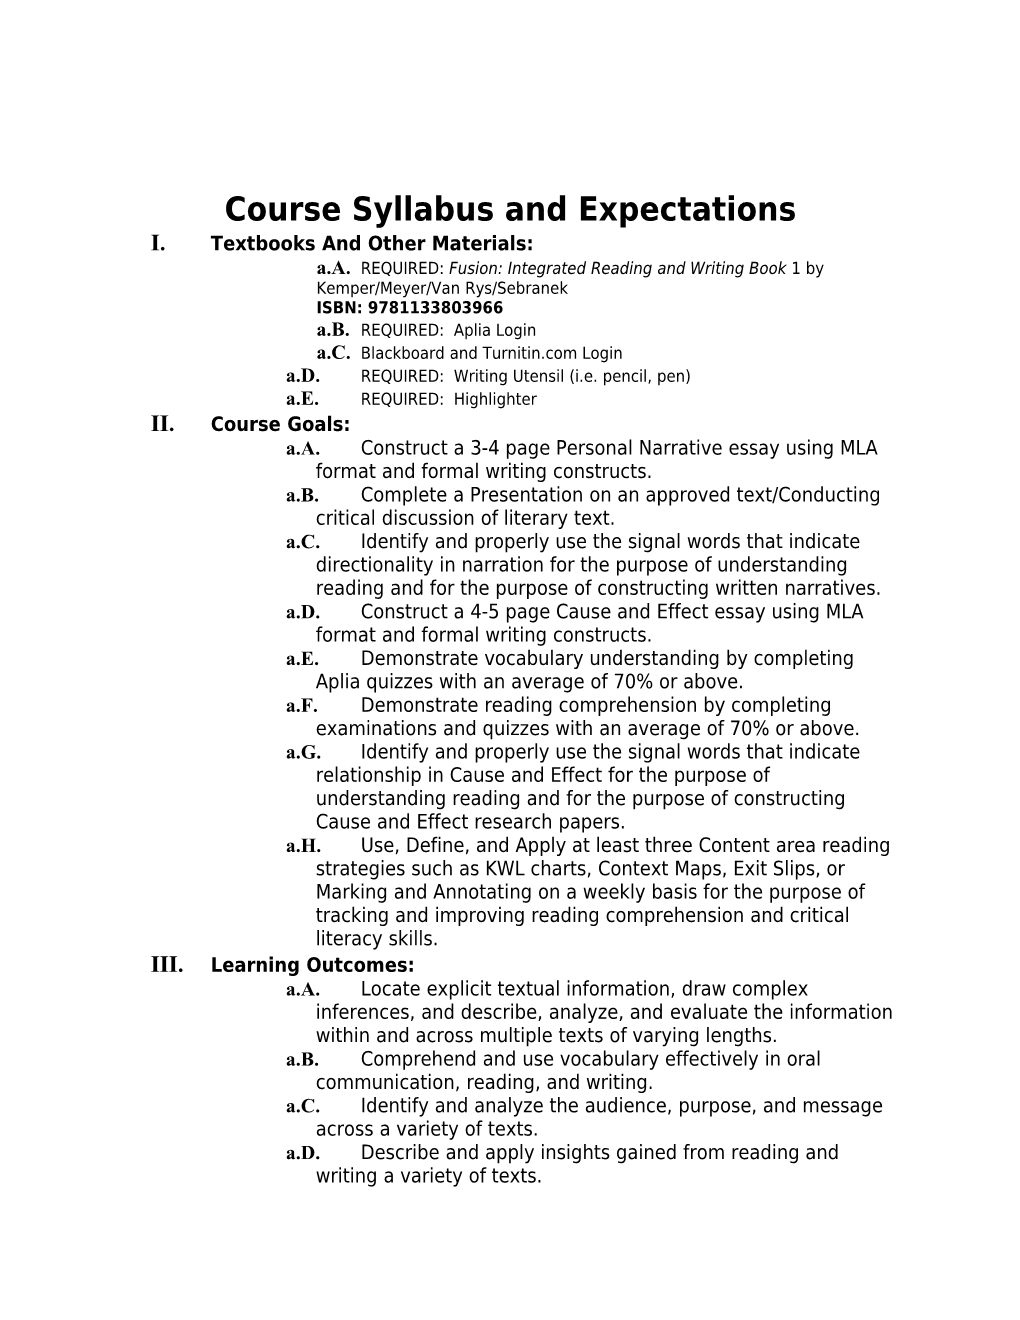 Course Syllabus and Expectations